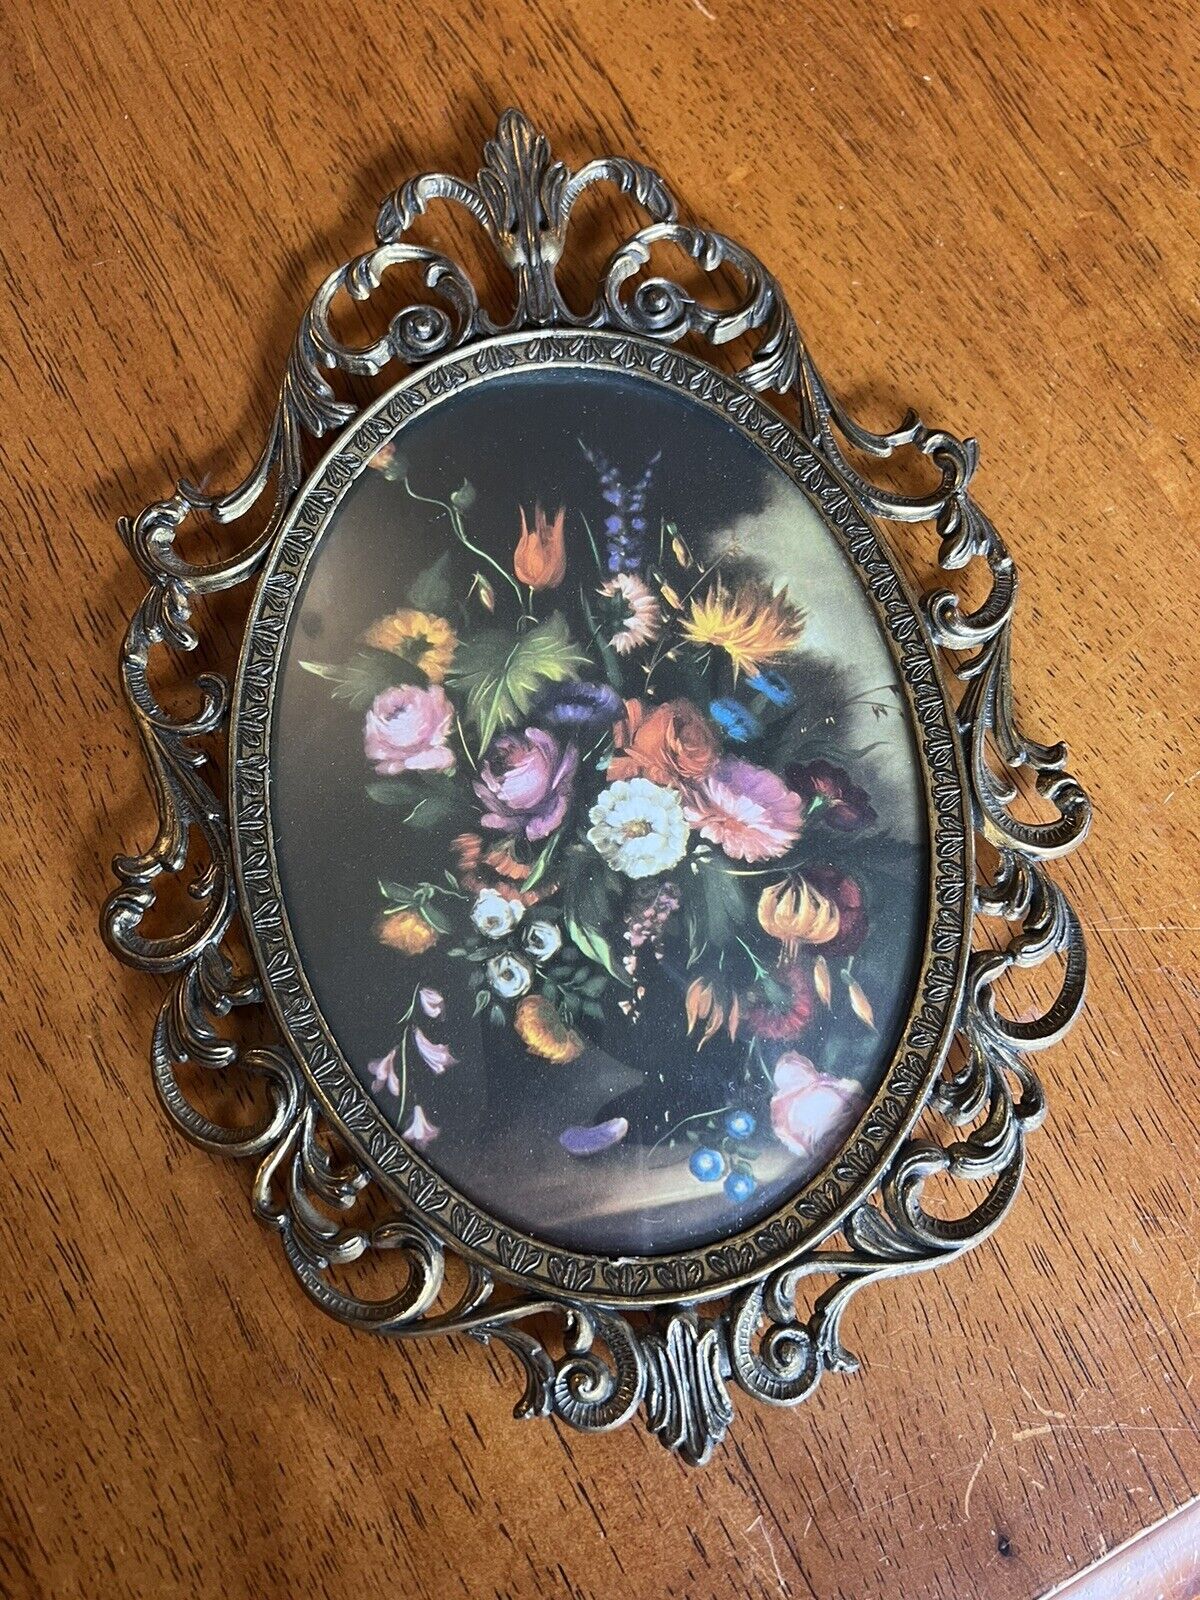 10” Vintage Oval Metal Wall Frame Floral Picture Convex Bubble Glass Italy Made